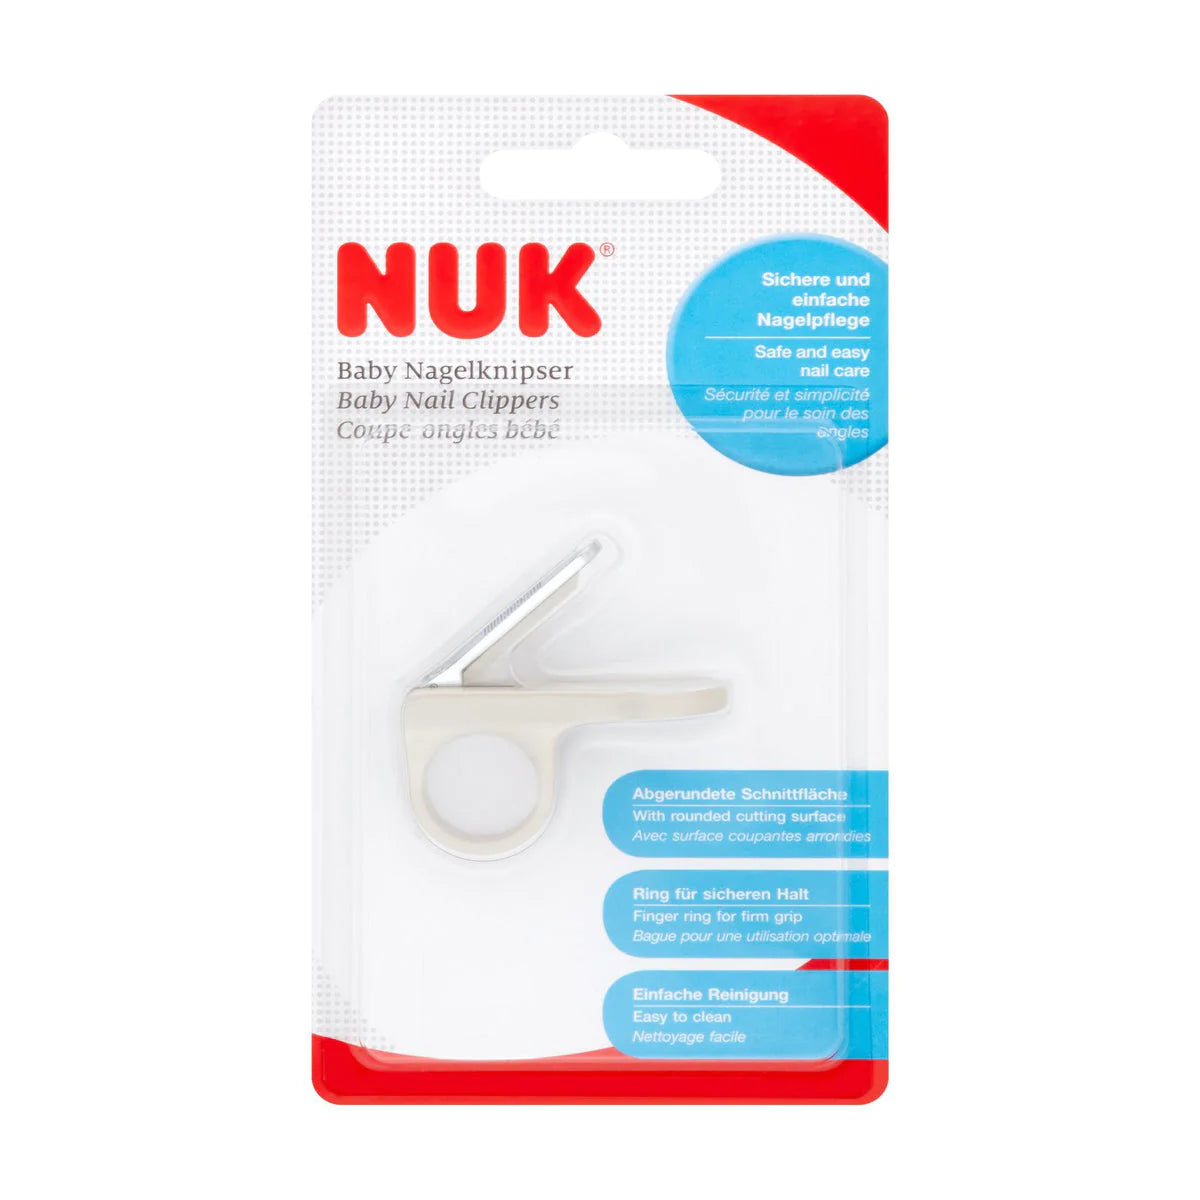 NUK BABY NAIL CLIPPERS